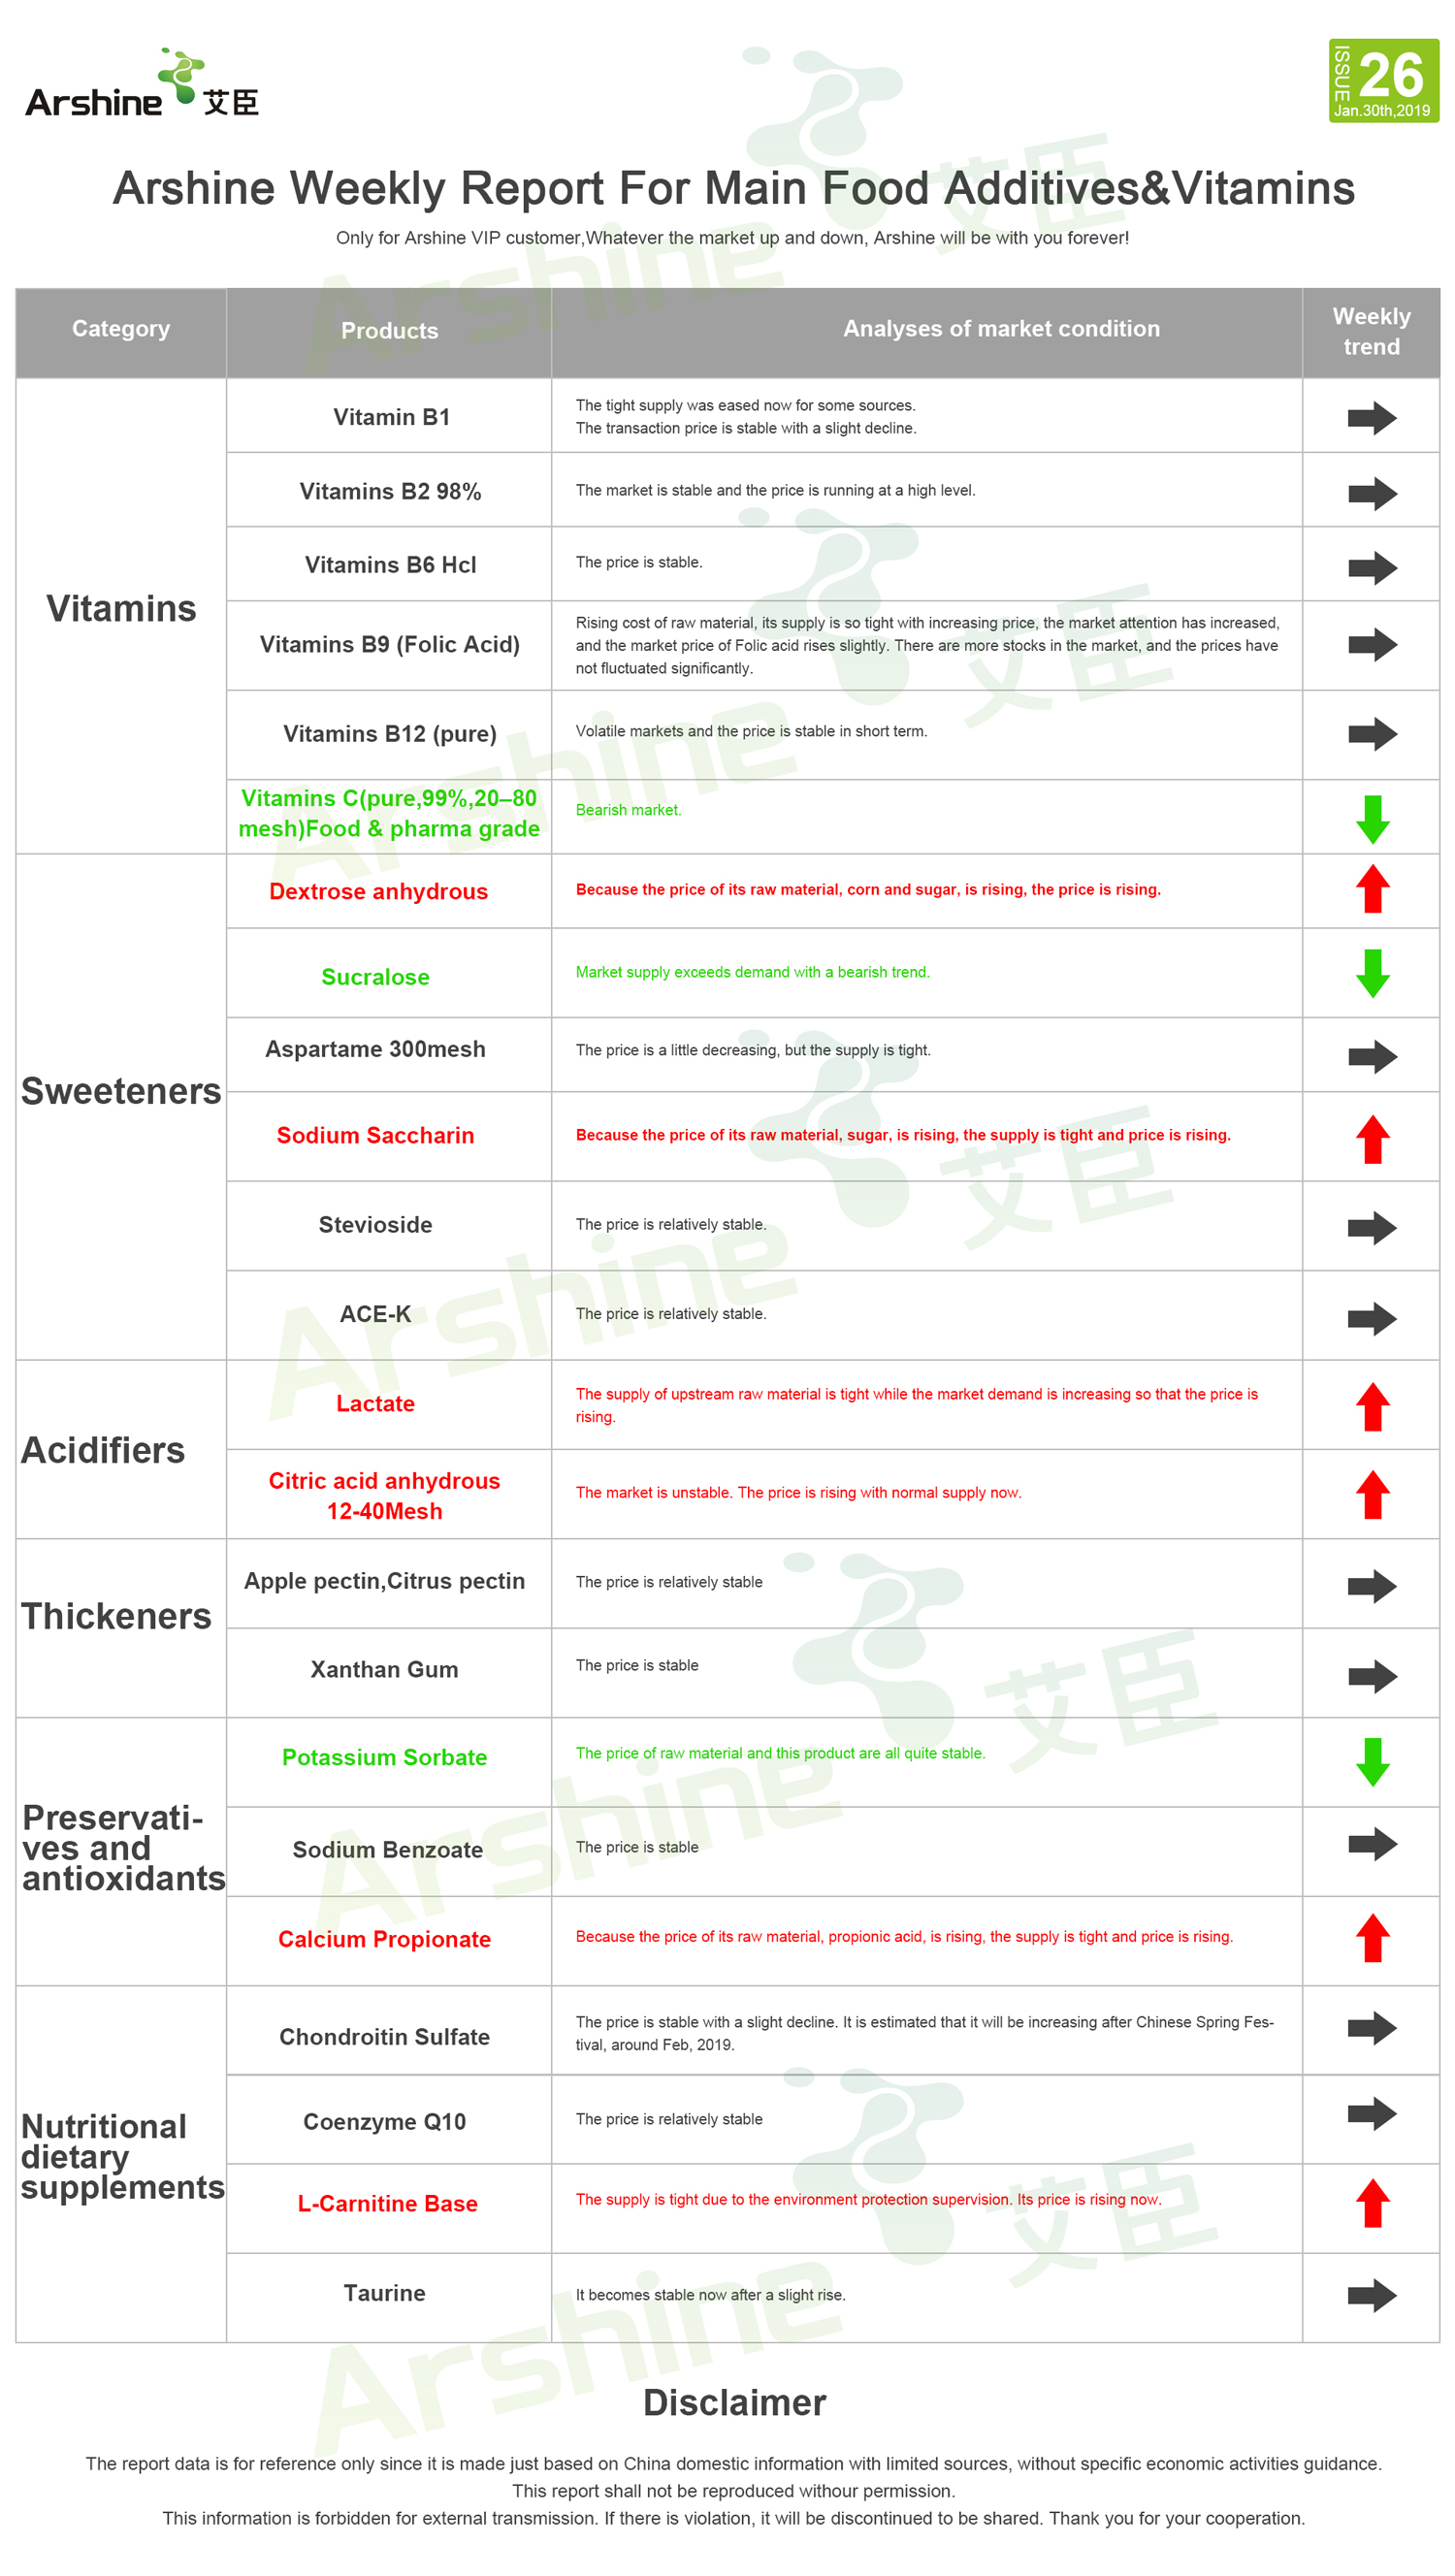 Arshine Weekly Report For Main Food Additives